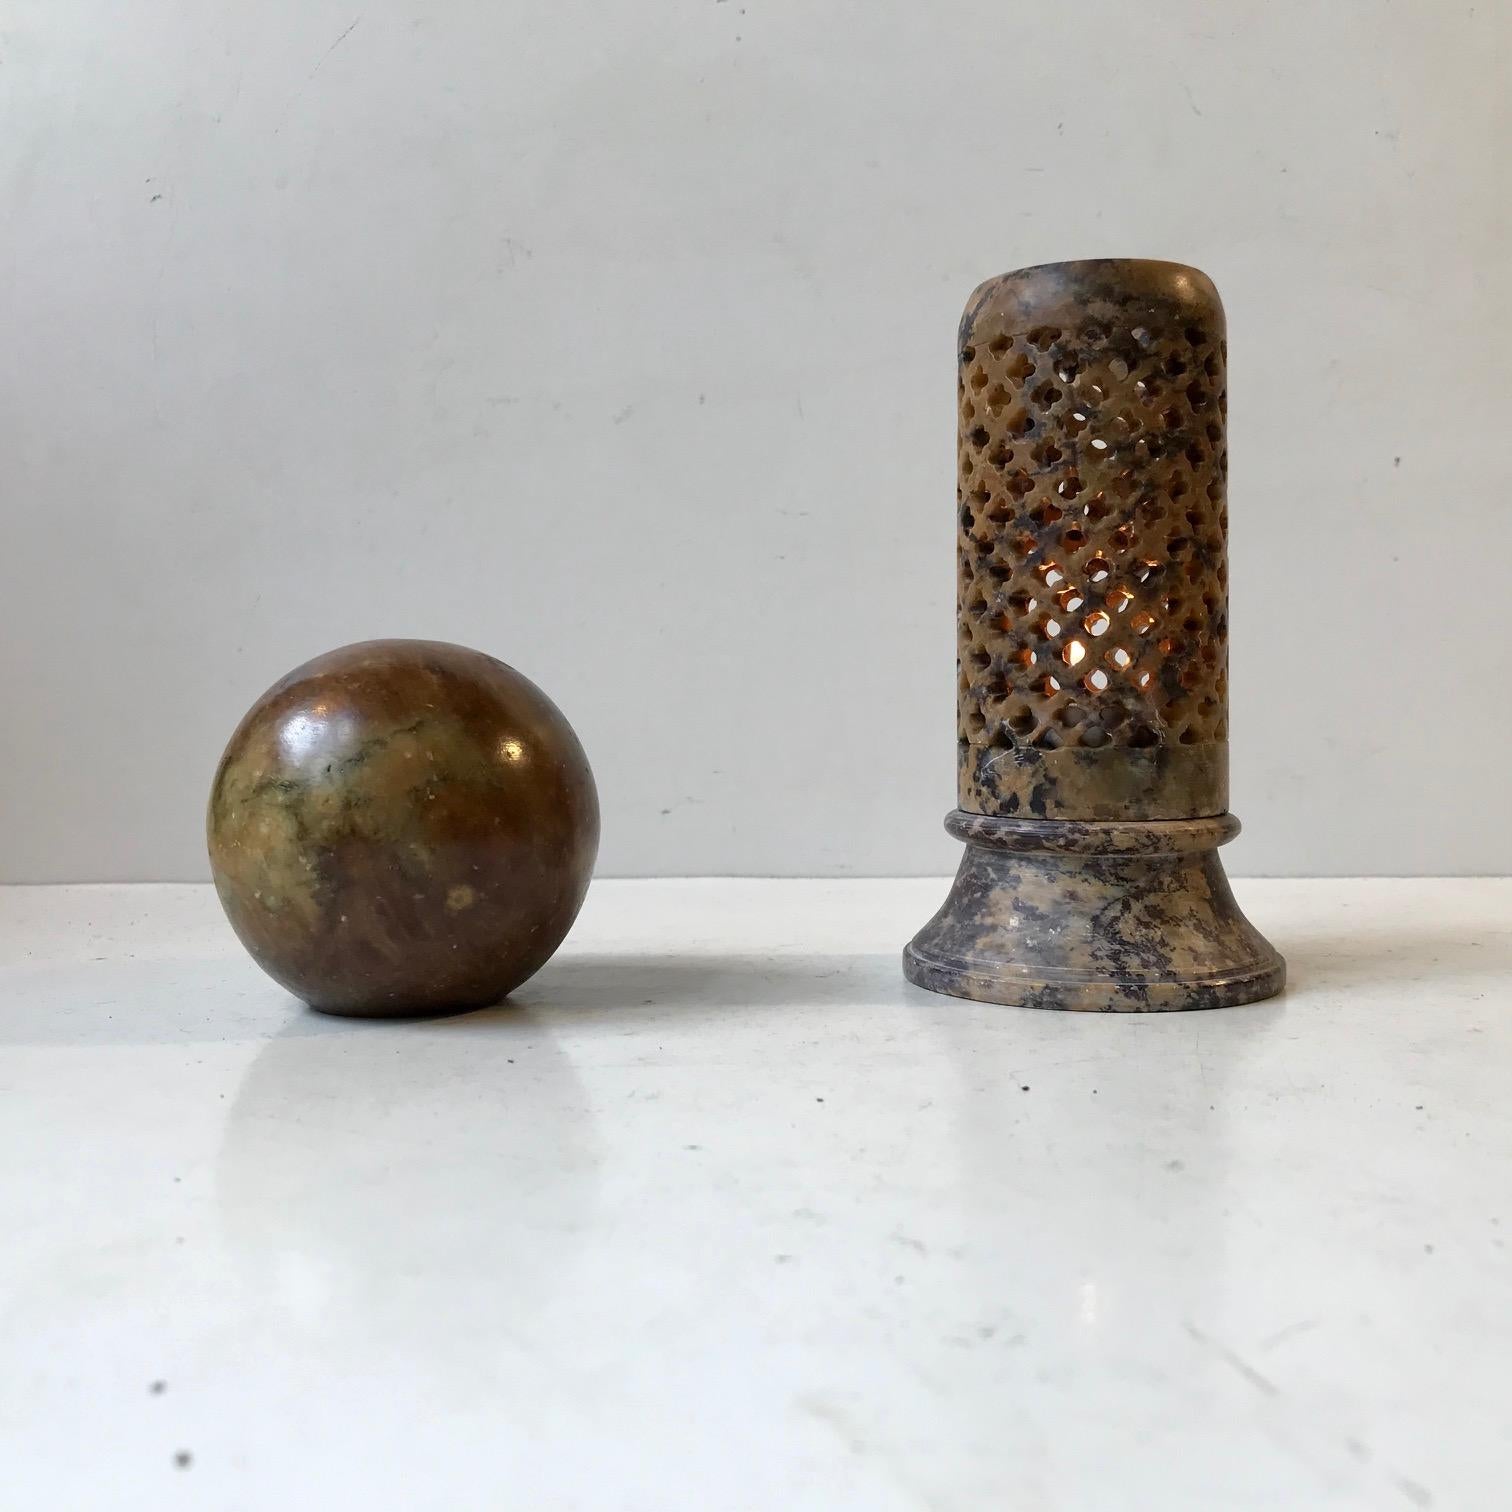 Decorative set in textured brown marble consisting of a paperweight sphere and a perforated candleholder for a tea- or small bloc light candle. The set was made in Scandinavia during the 1930s. Measurements: H: 14/6.5 cm.